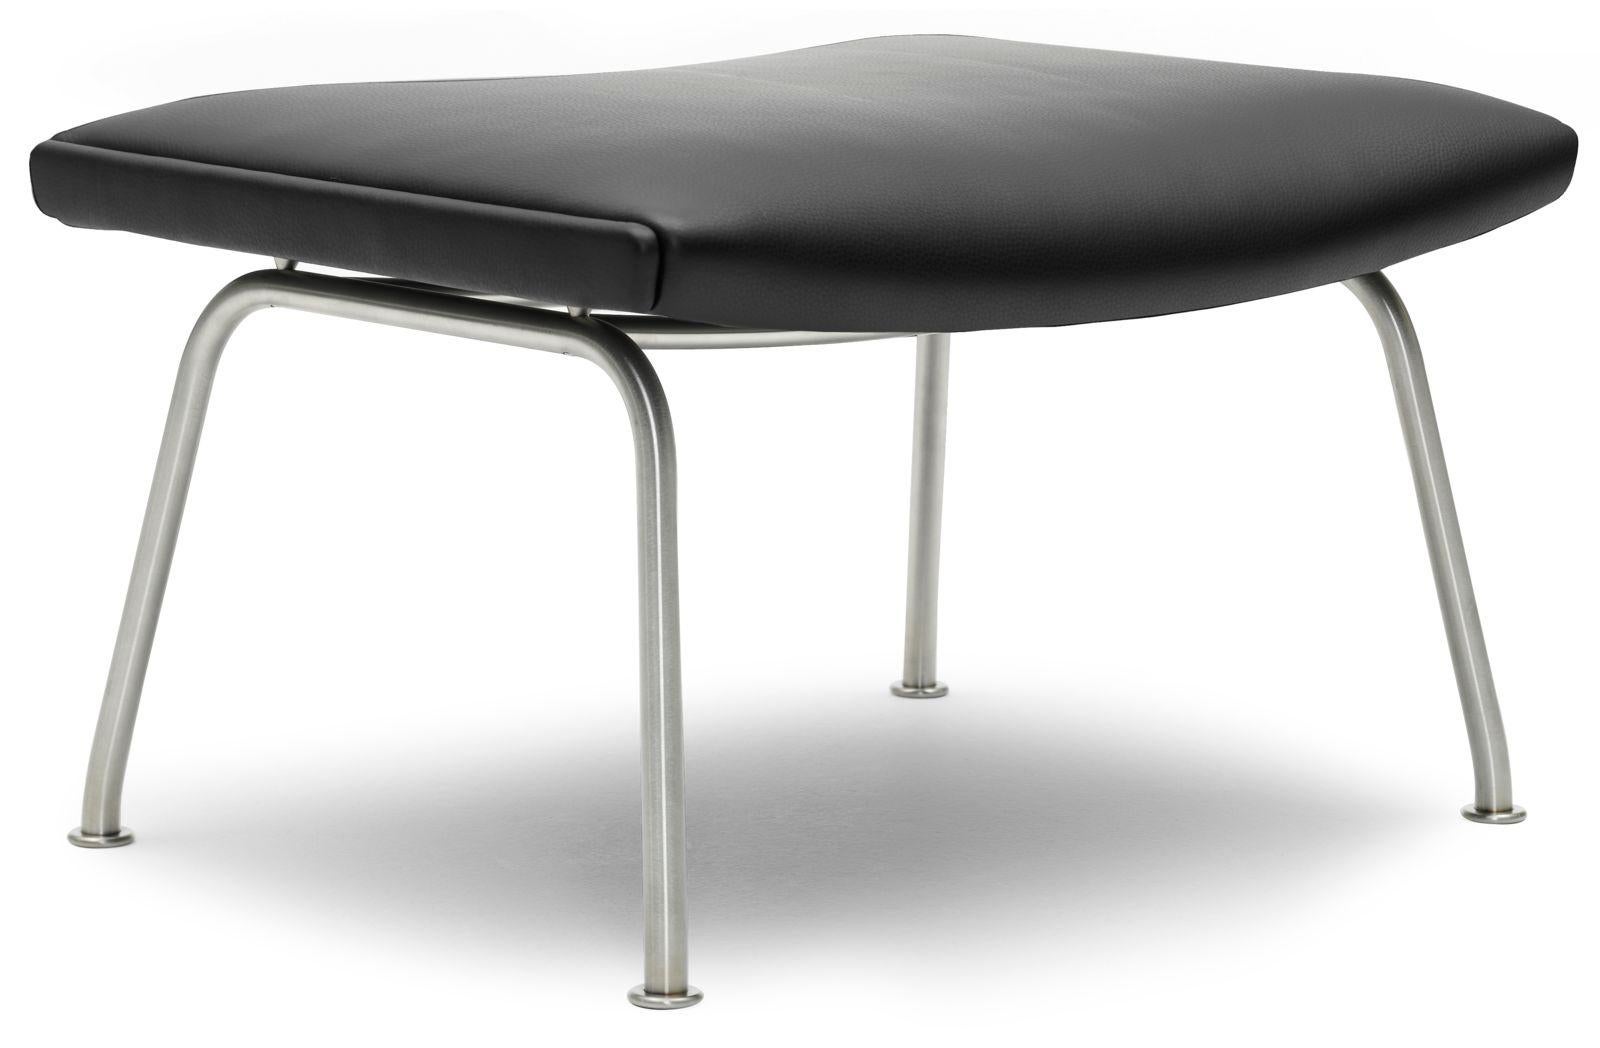 -Available in graded-in fabrics, leathers and COM/COL. 
-Fabric charts available upon request.
-Priced as fabric group 1.

The CH446 footstool was originally designed by Hans J. Wegner in 1958 for the CH401 chair. It has a light appearance, in spite